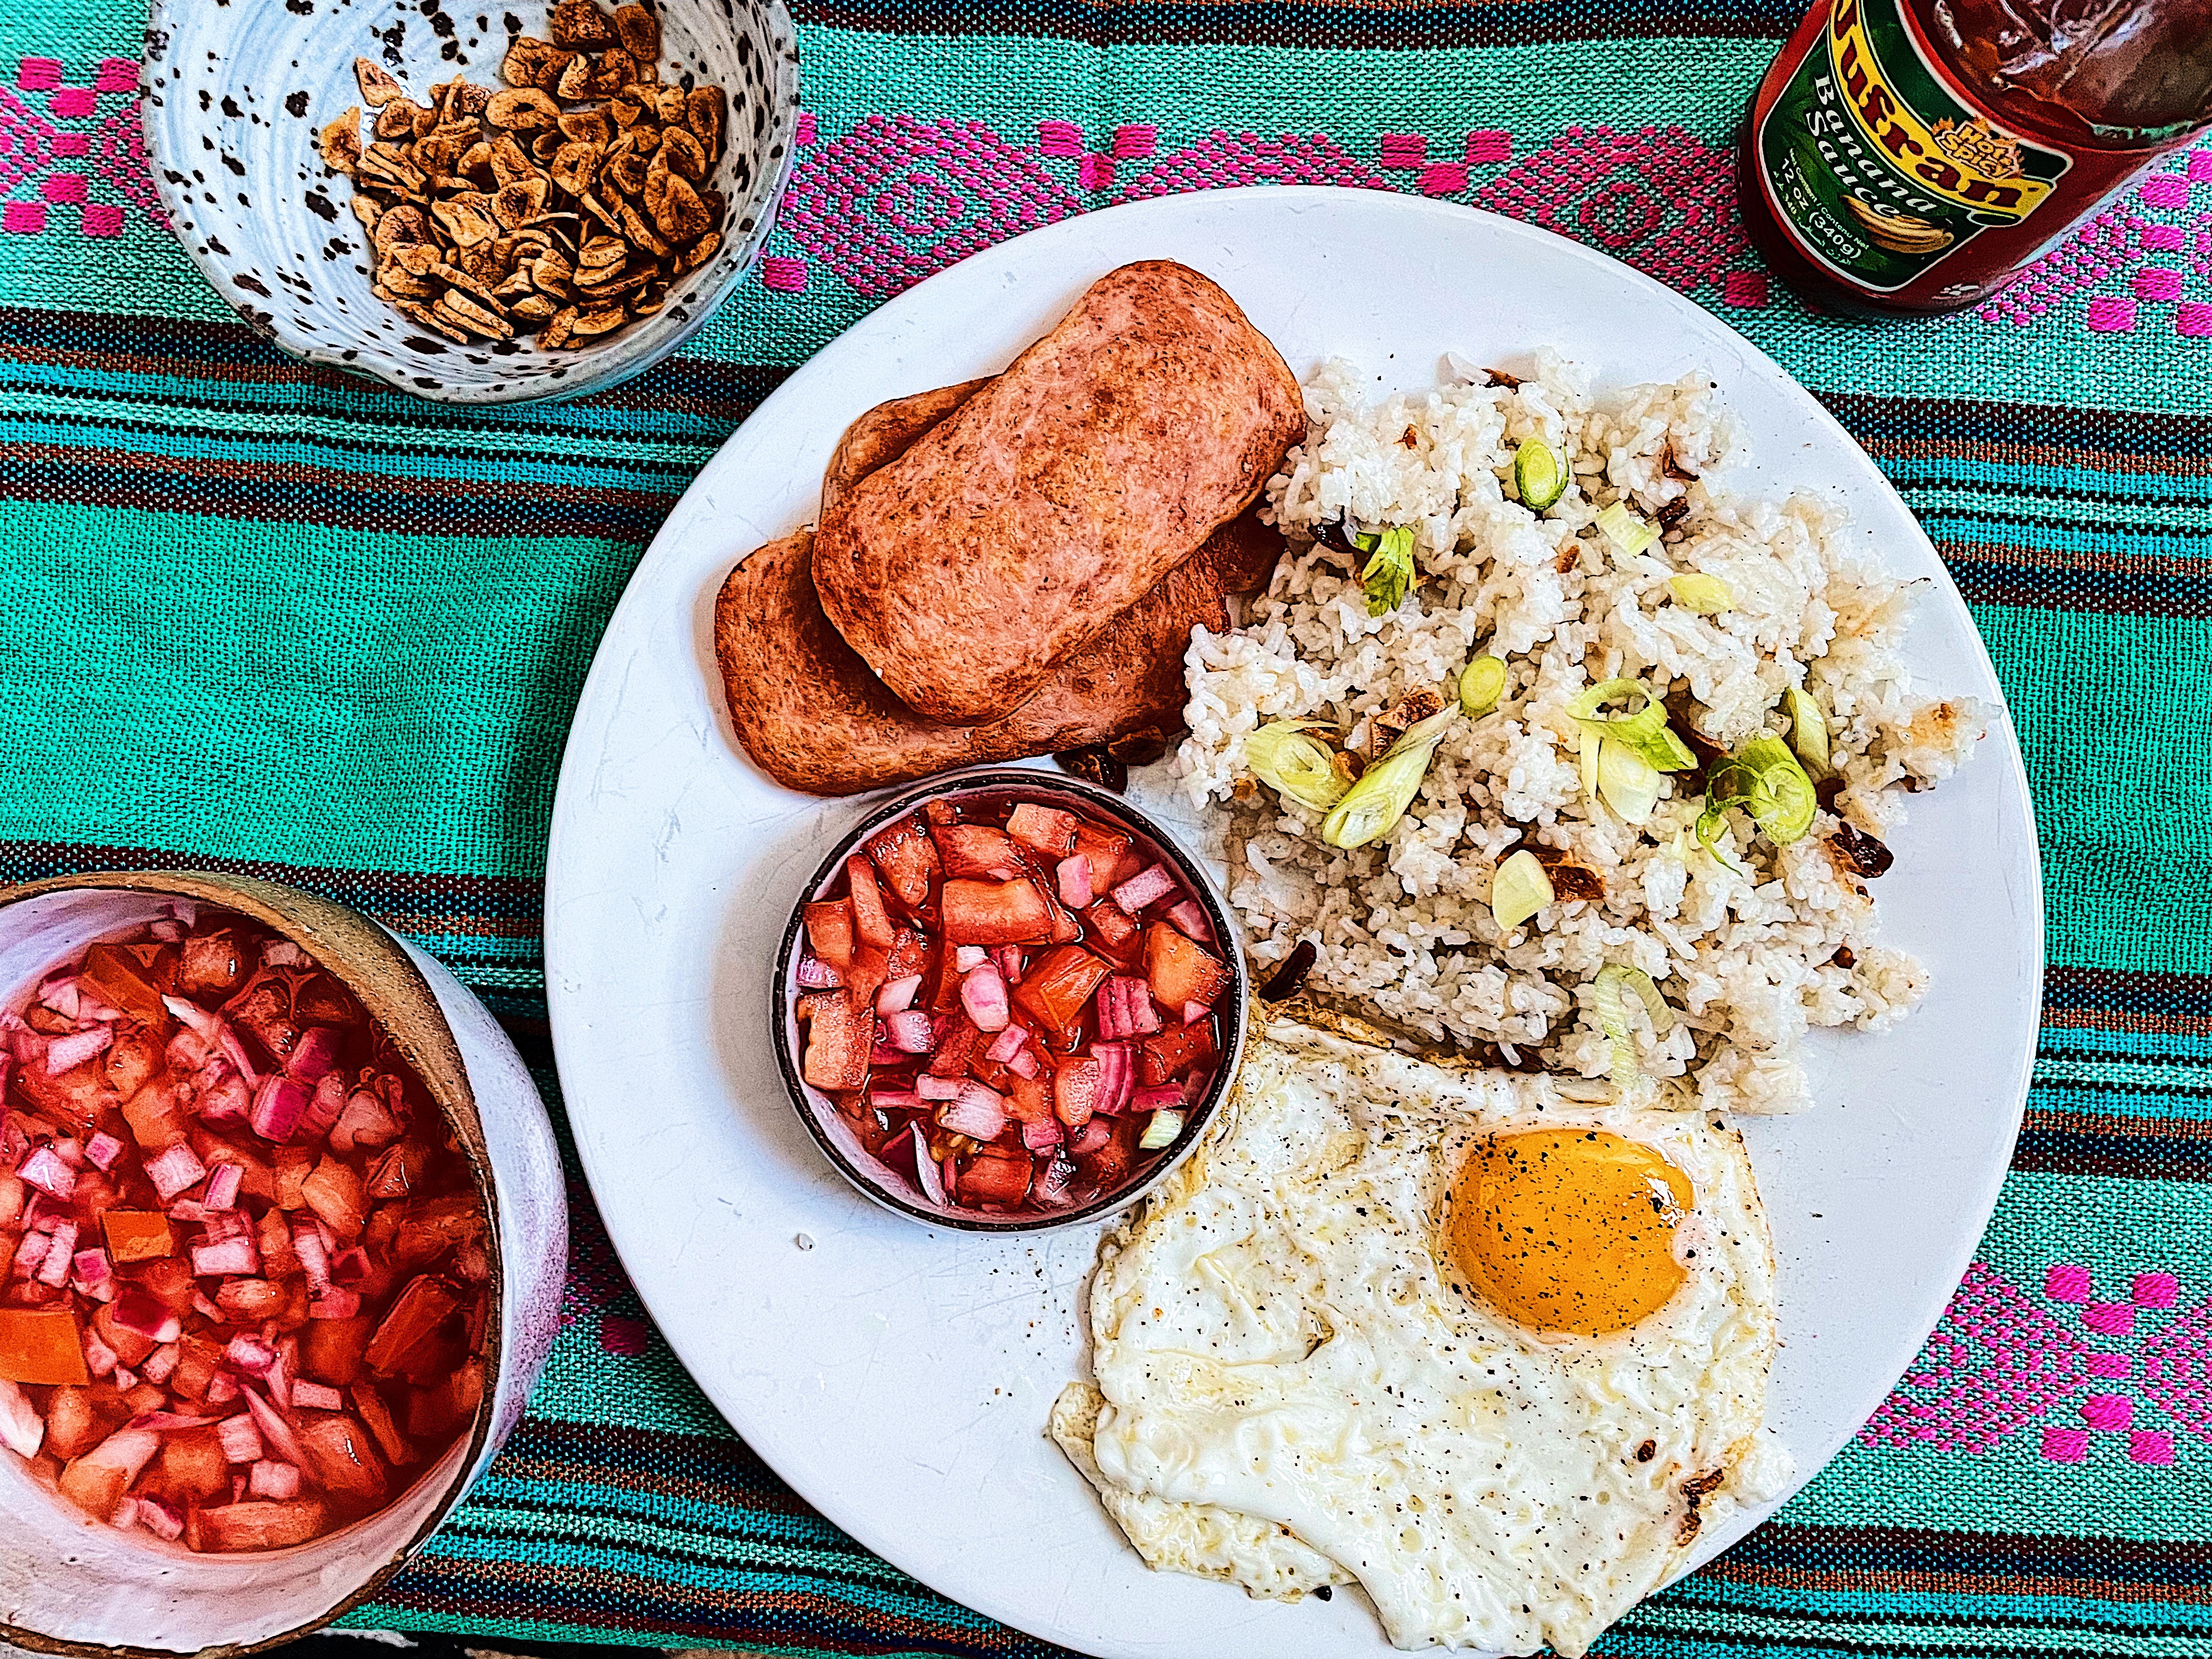 For this Filipino breakfast, the true star is garlic-studded fried rice